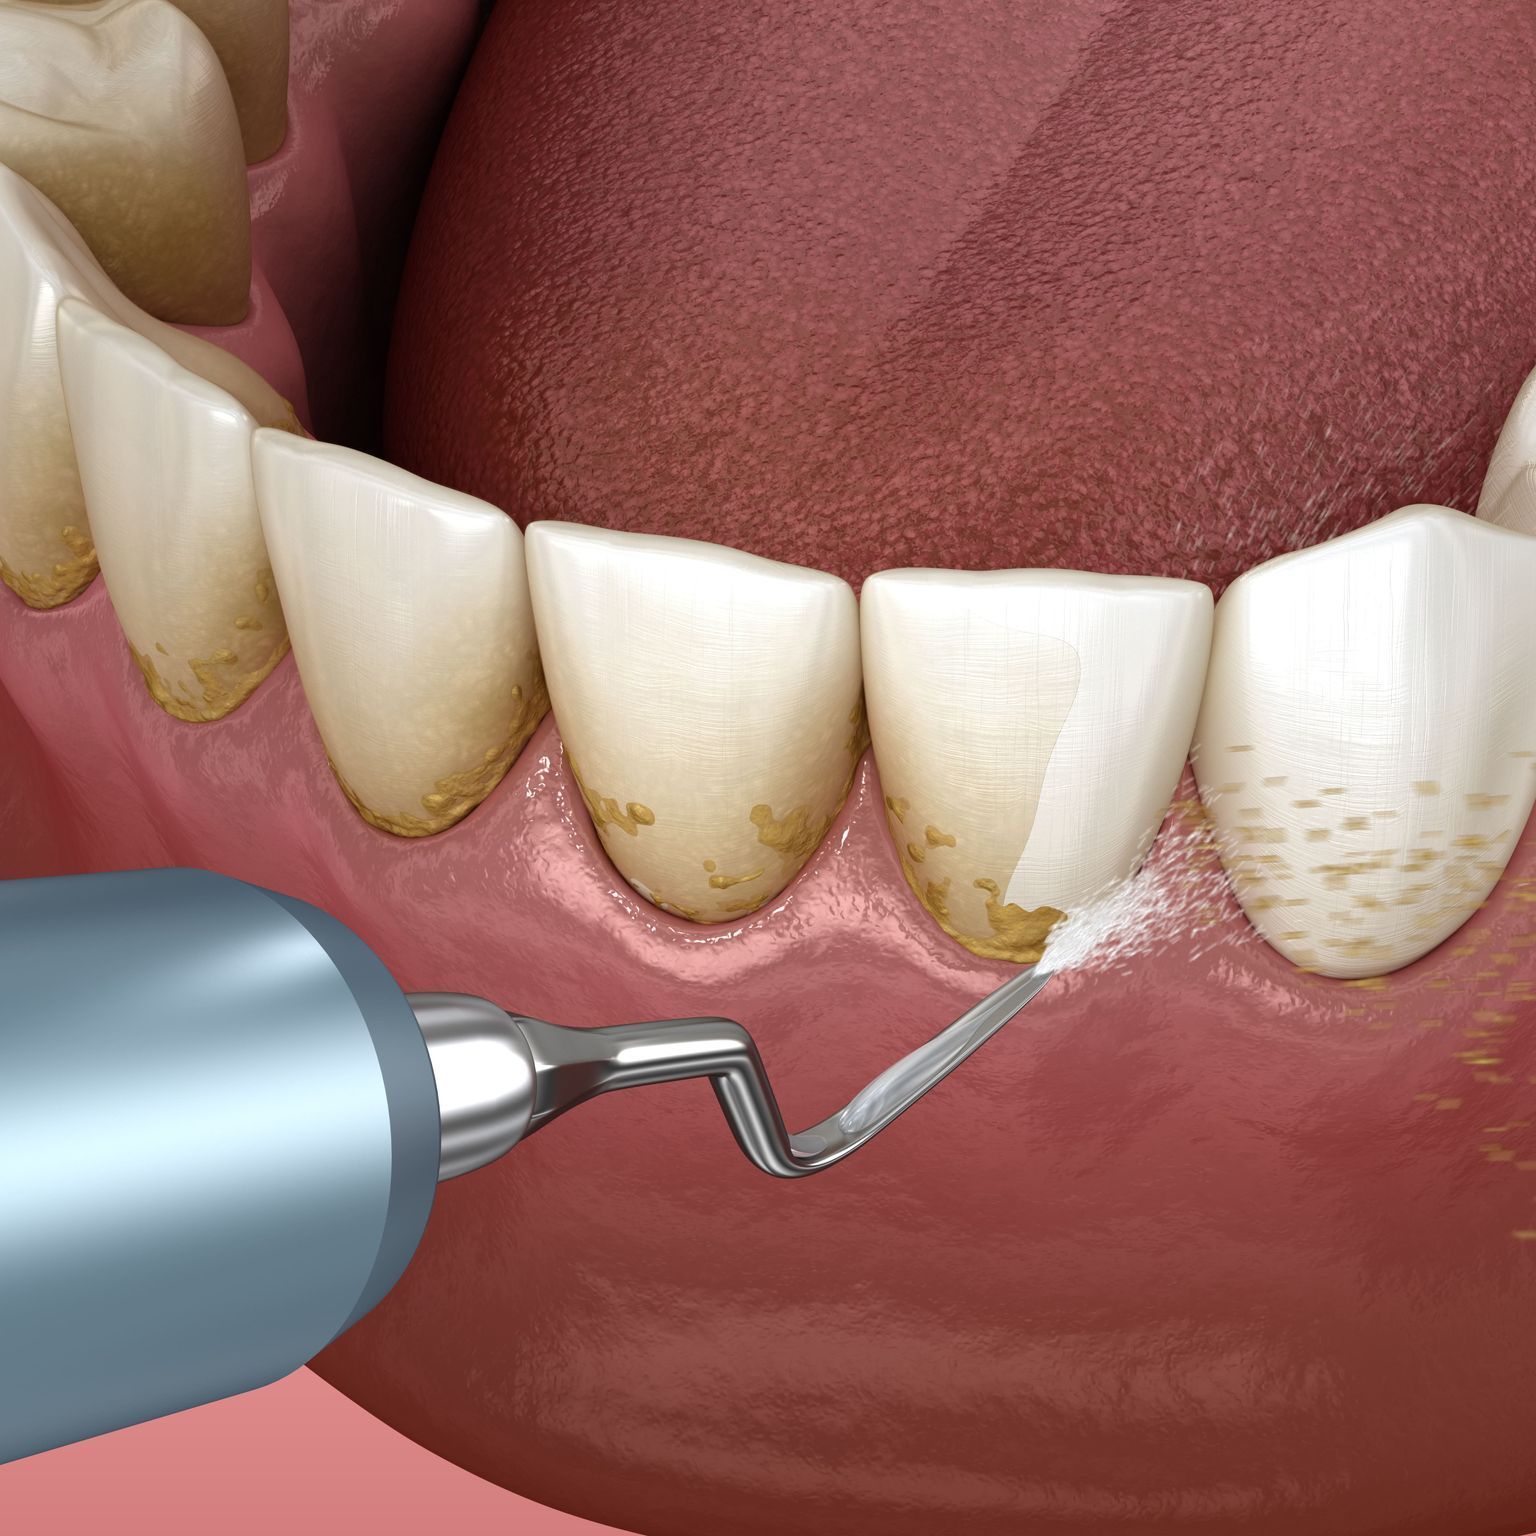 A computer generated image of a dental tool cleaning at the gum line